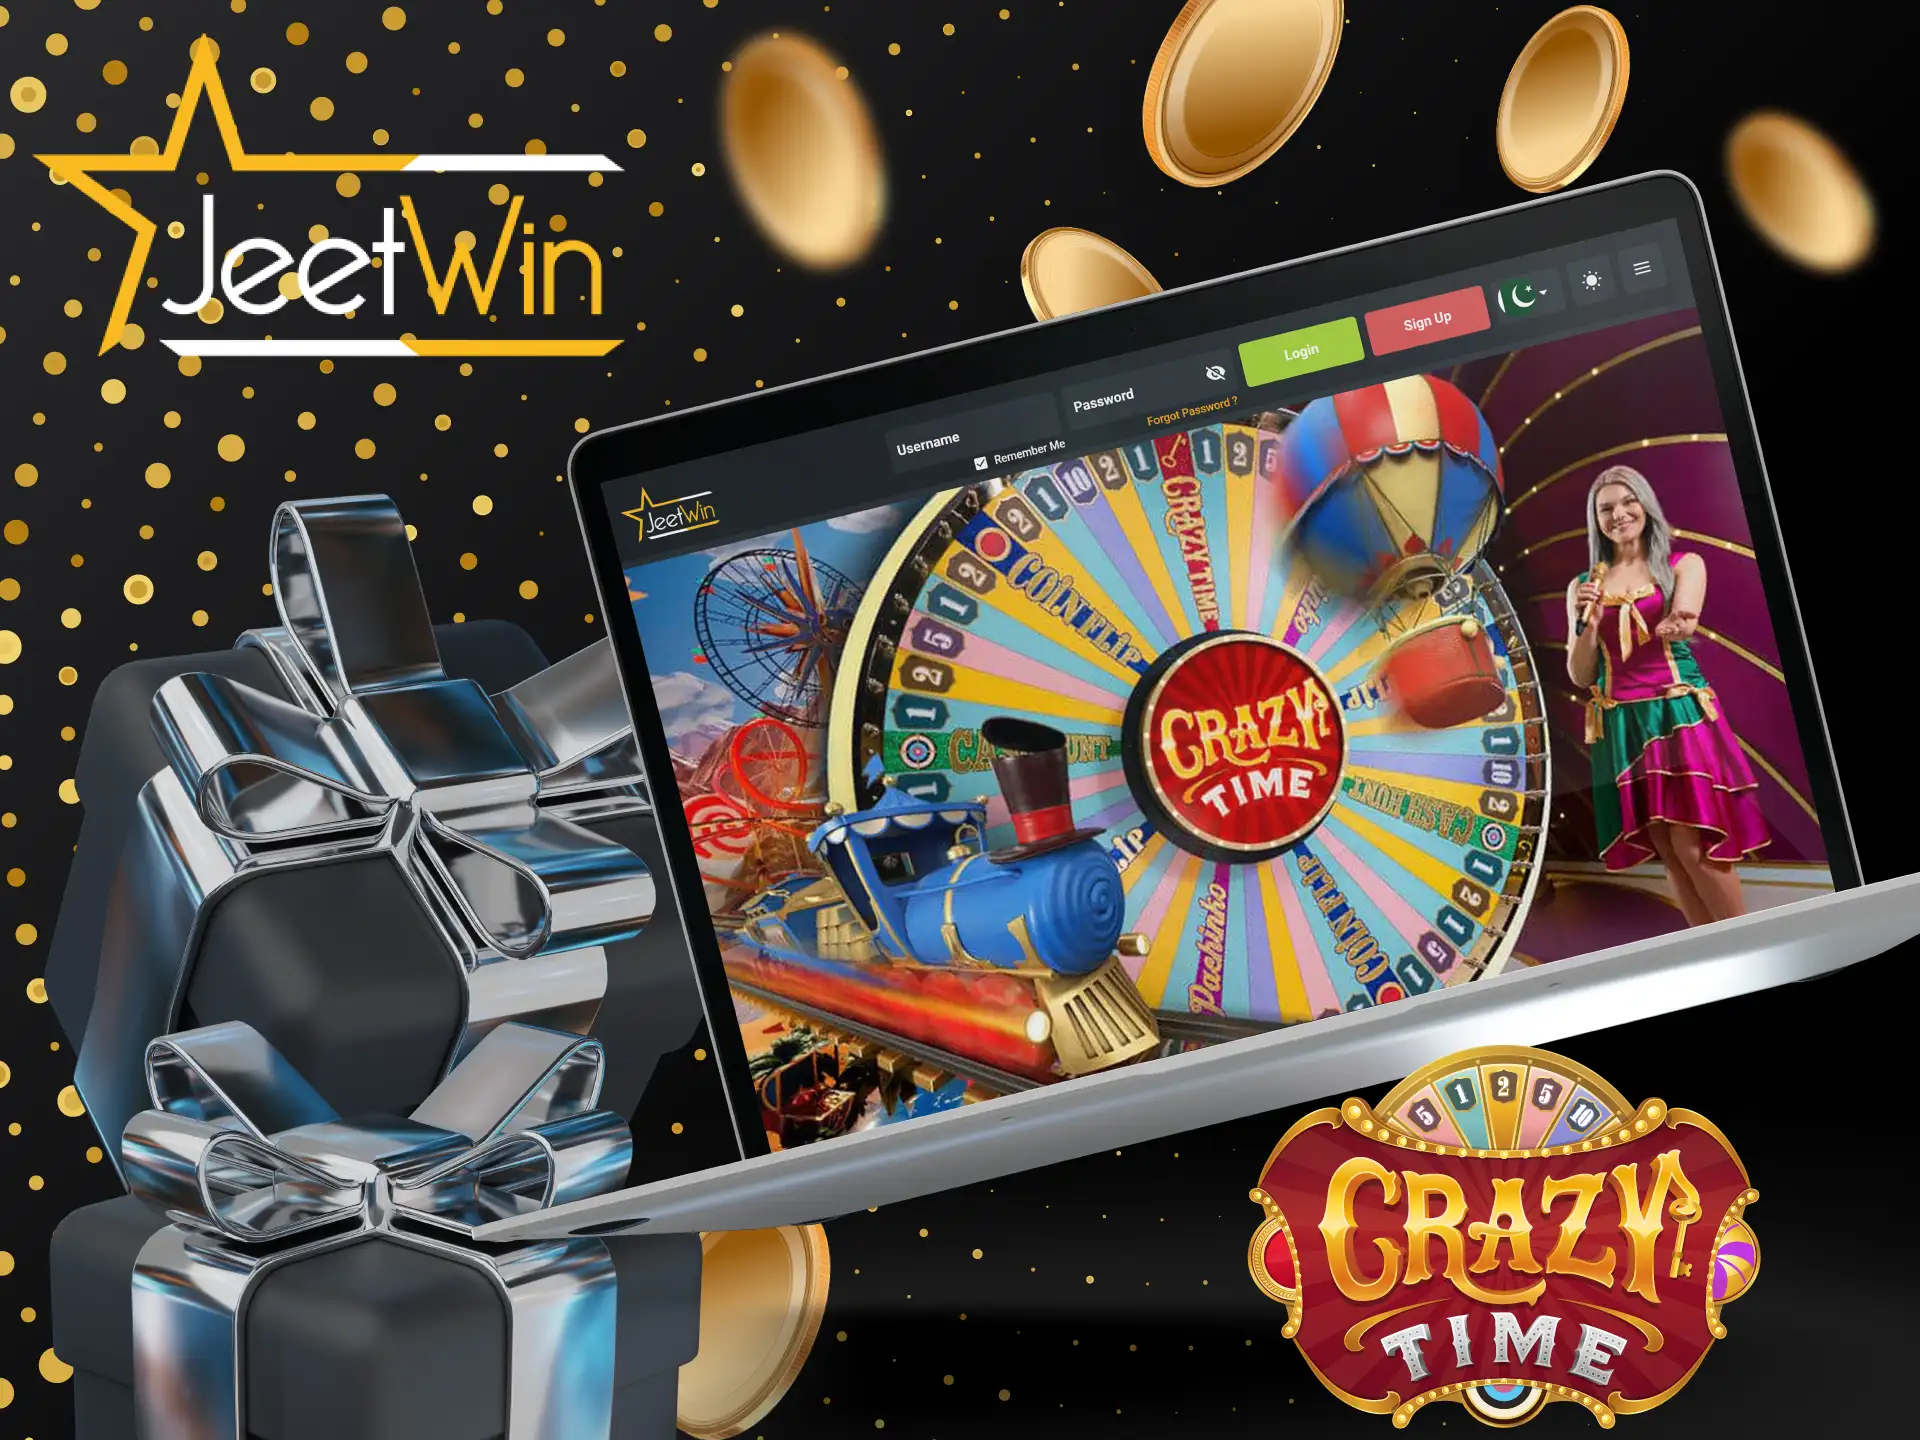 Take part in the Crazy Time bonus games at JeetWin.